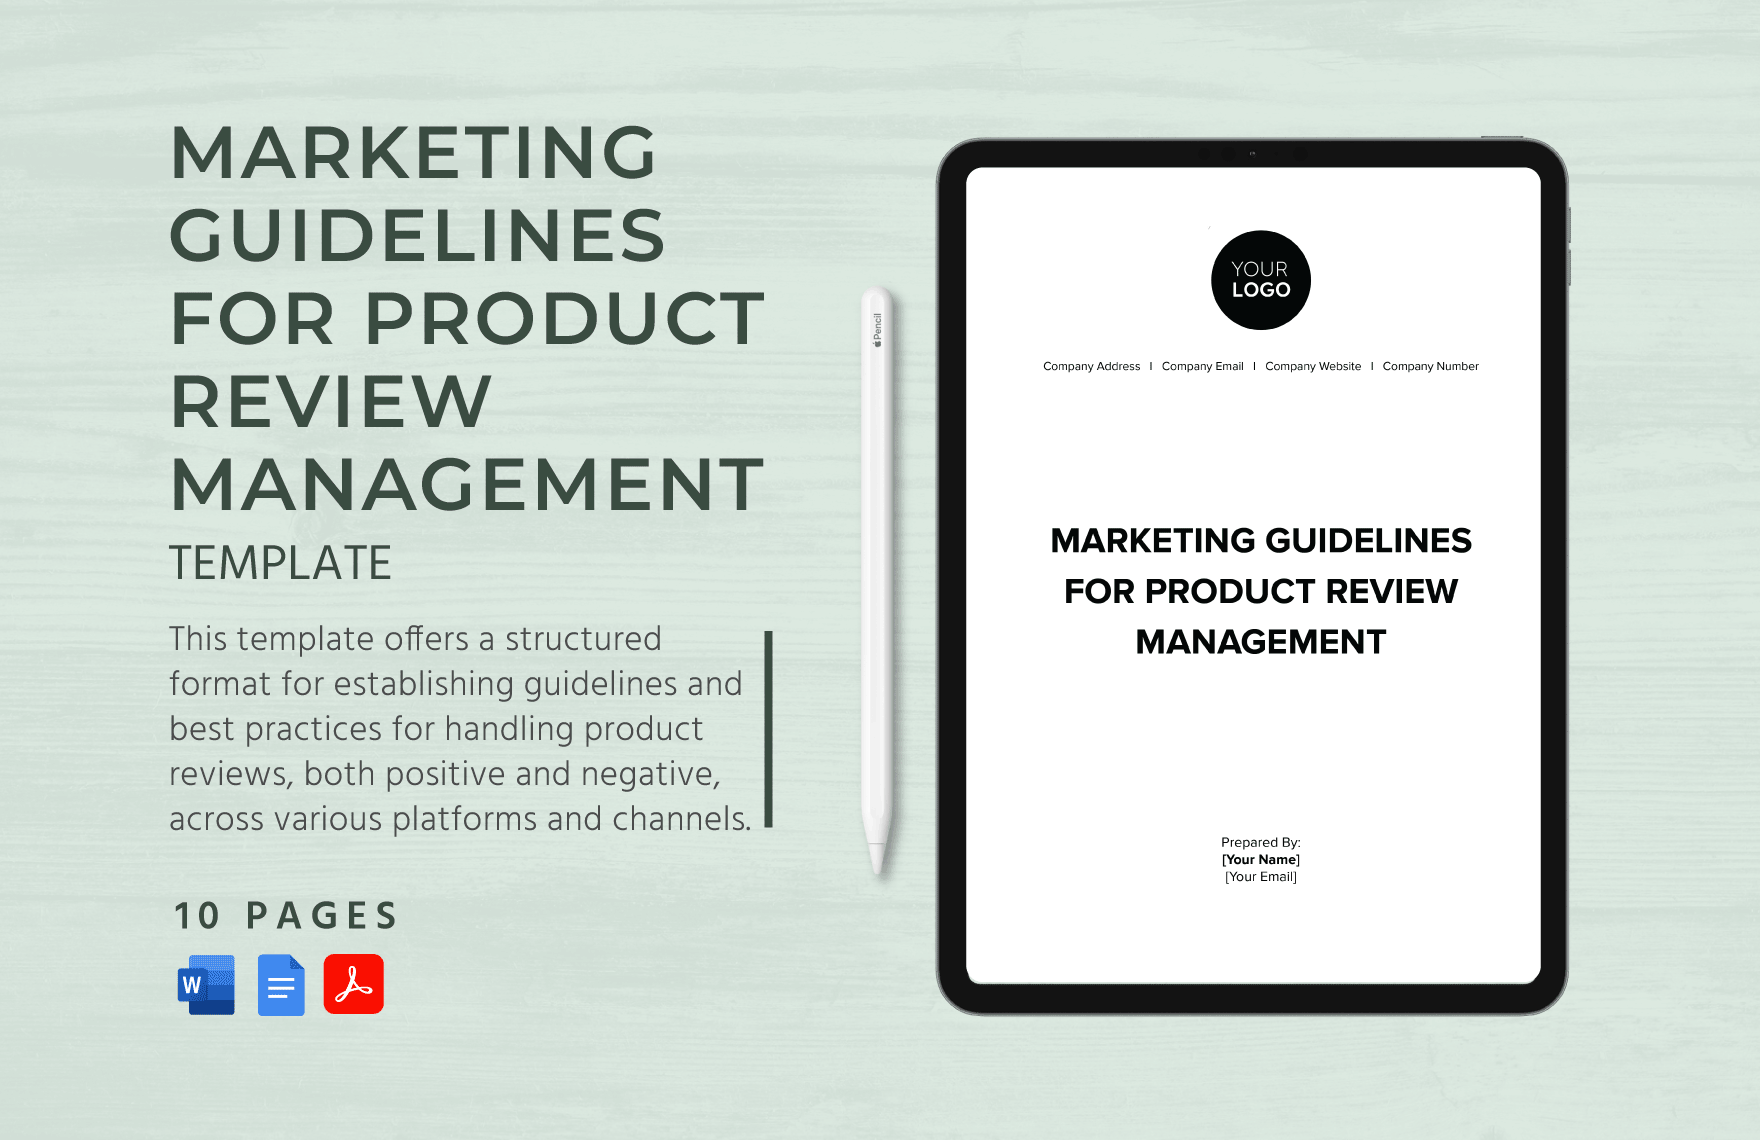 Marketing Guidelines for Product Review Management Template